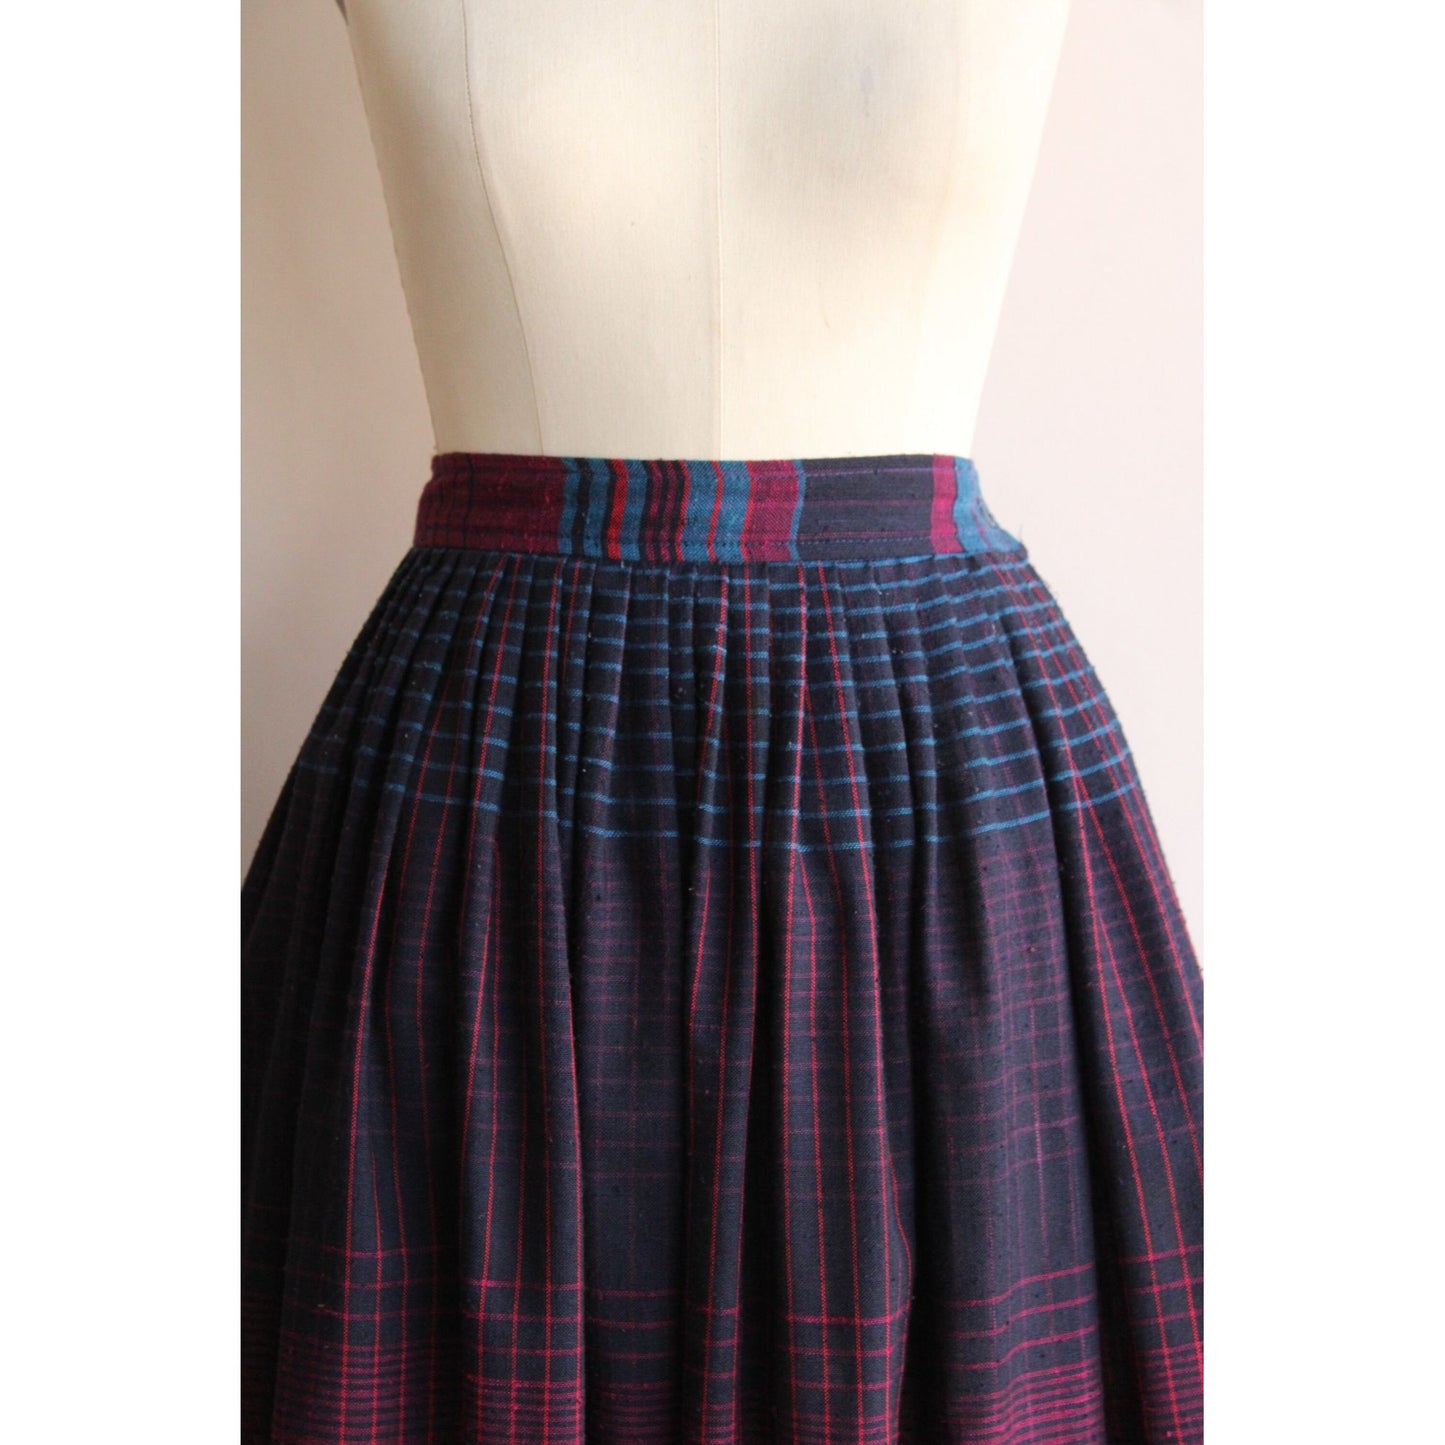 Vintage 1980s The Villager Plaid Check Pleated Full Skirt with Pocket